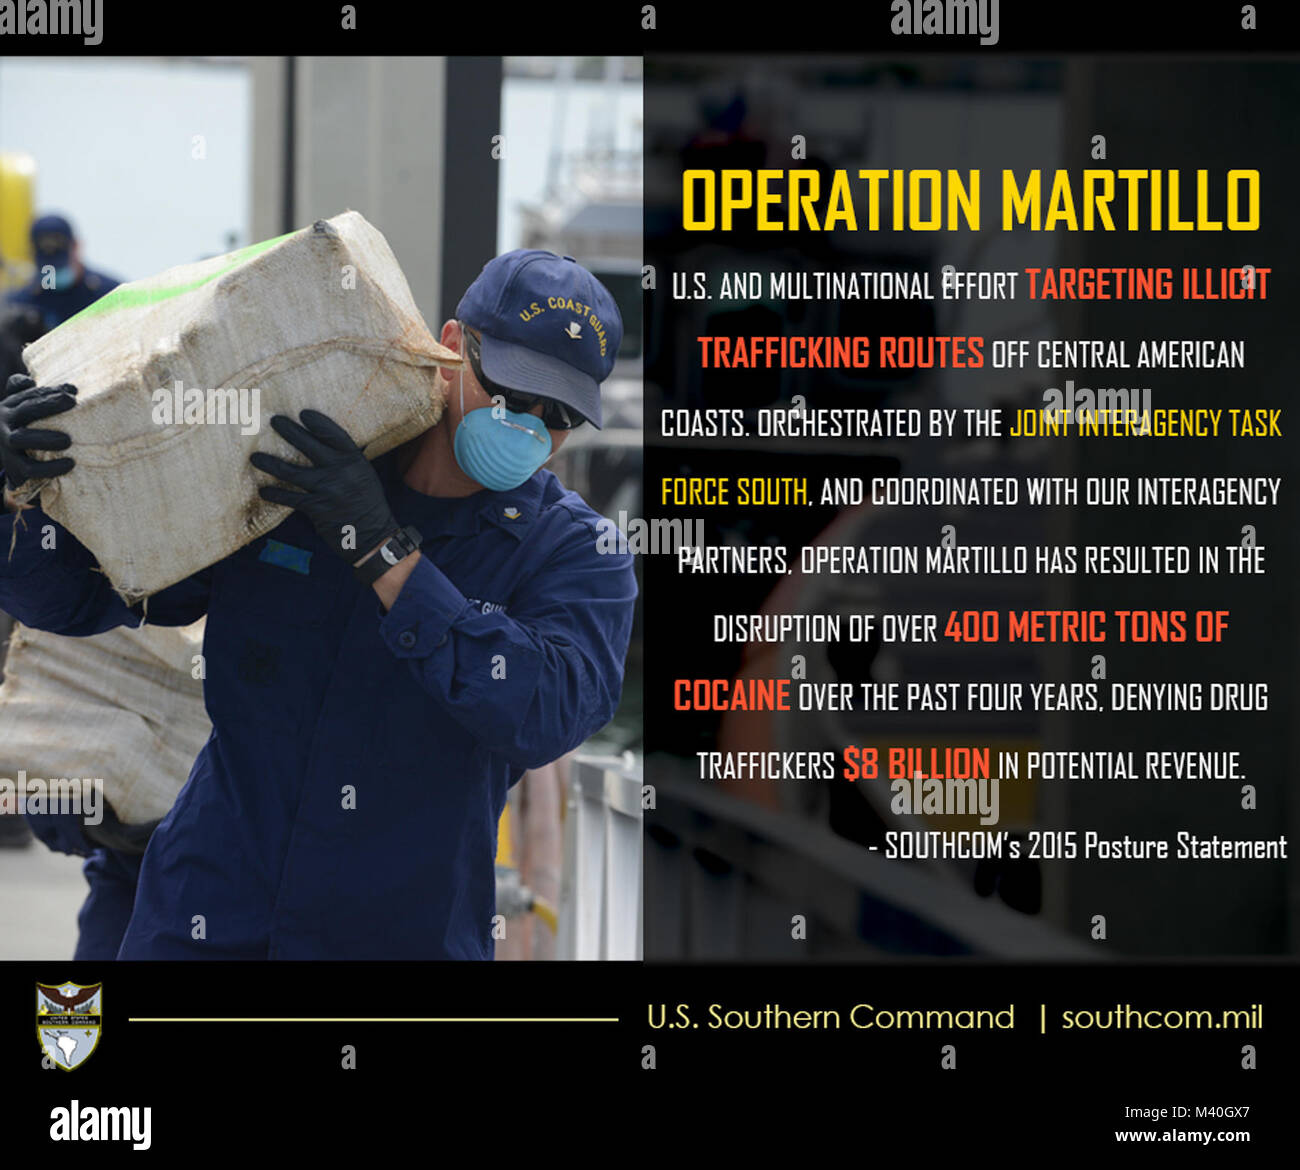 Photo of Coastguardsman carries bales of seized drugs. CAPTION: US and multinational effort targeting illicit trafficking routes of  Central American COASTS. Orchestrated by the Joint Interagency Task Force South, and coordinated with our interagency partners, Operation Martillo has resulted in the disruption of over 400 metric tons of cocaine over the past four years, denying drug traffickers $8 billion in potential revenue. SOUTHCOM infographic  OPERATION MARTILLO by ussouthcom Stock Photo